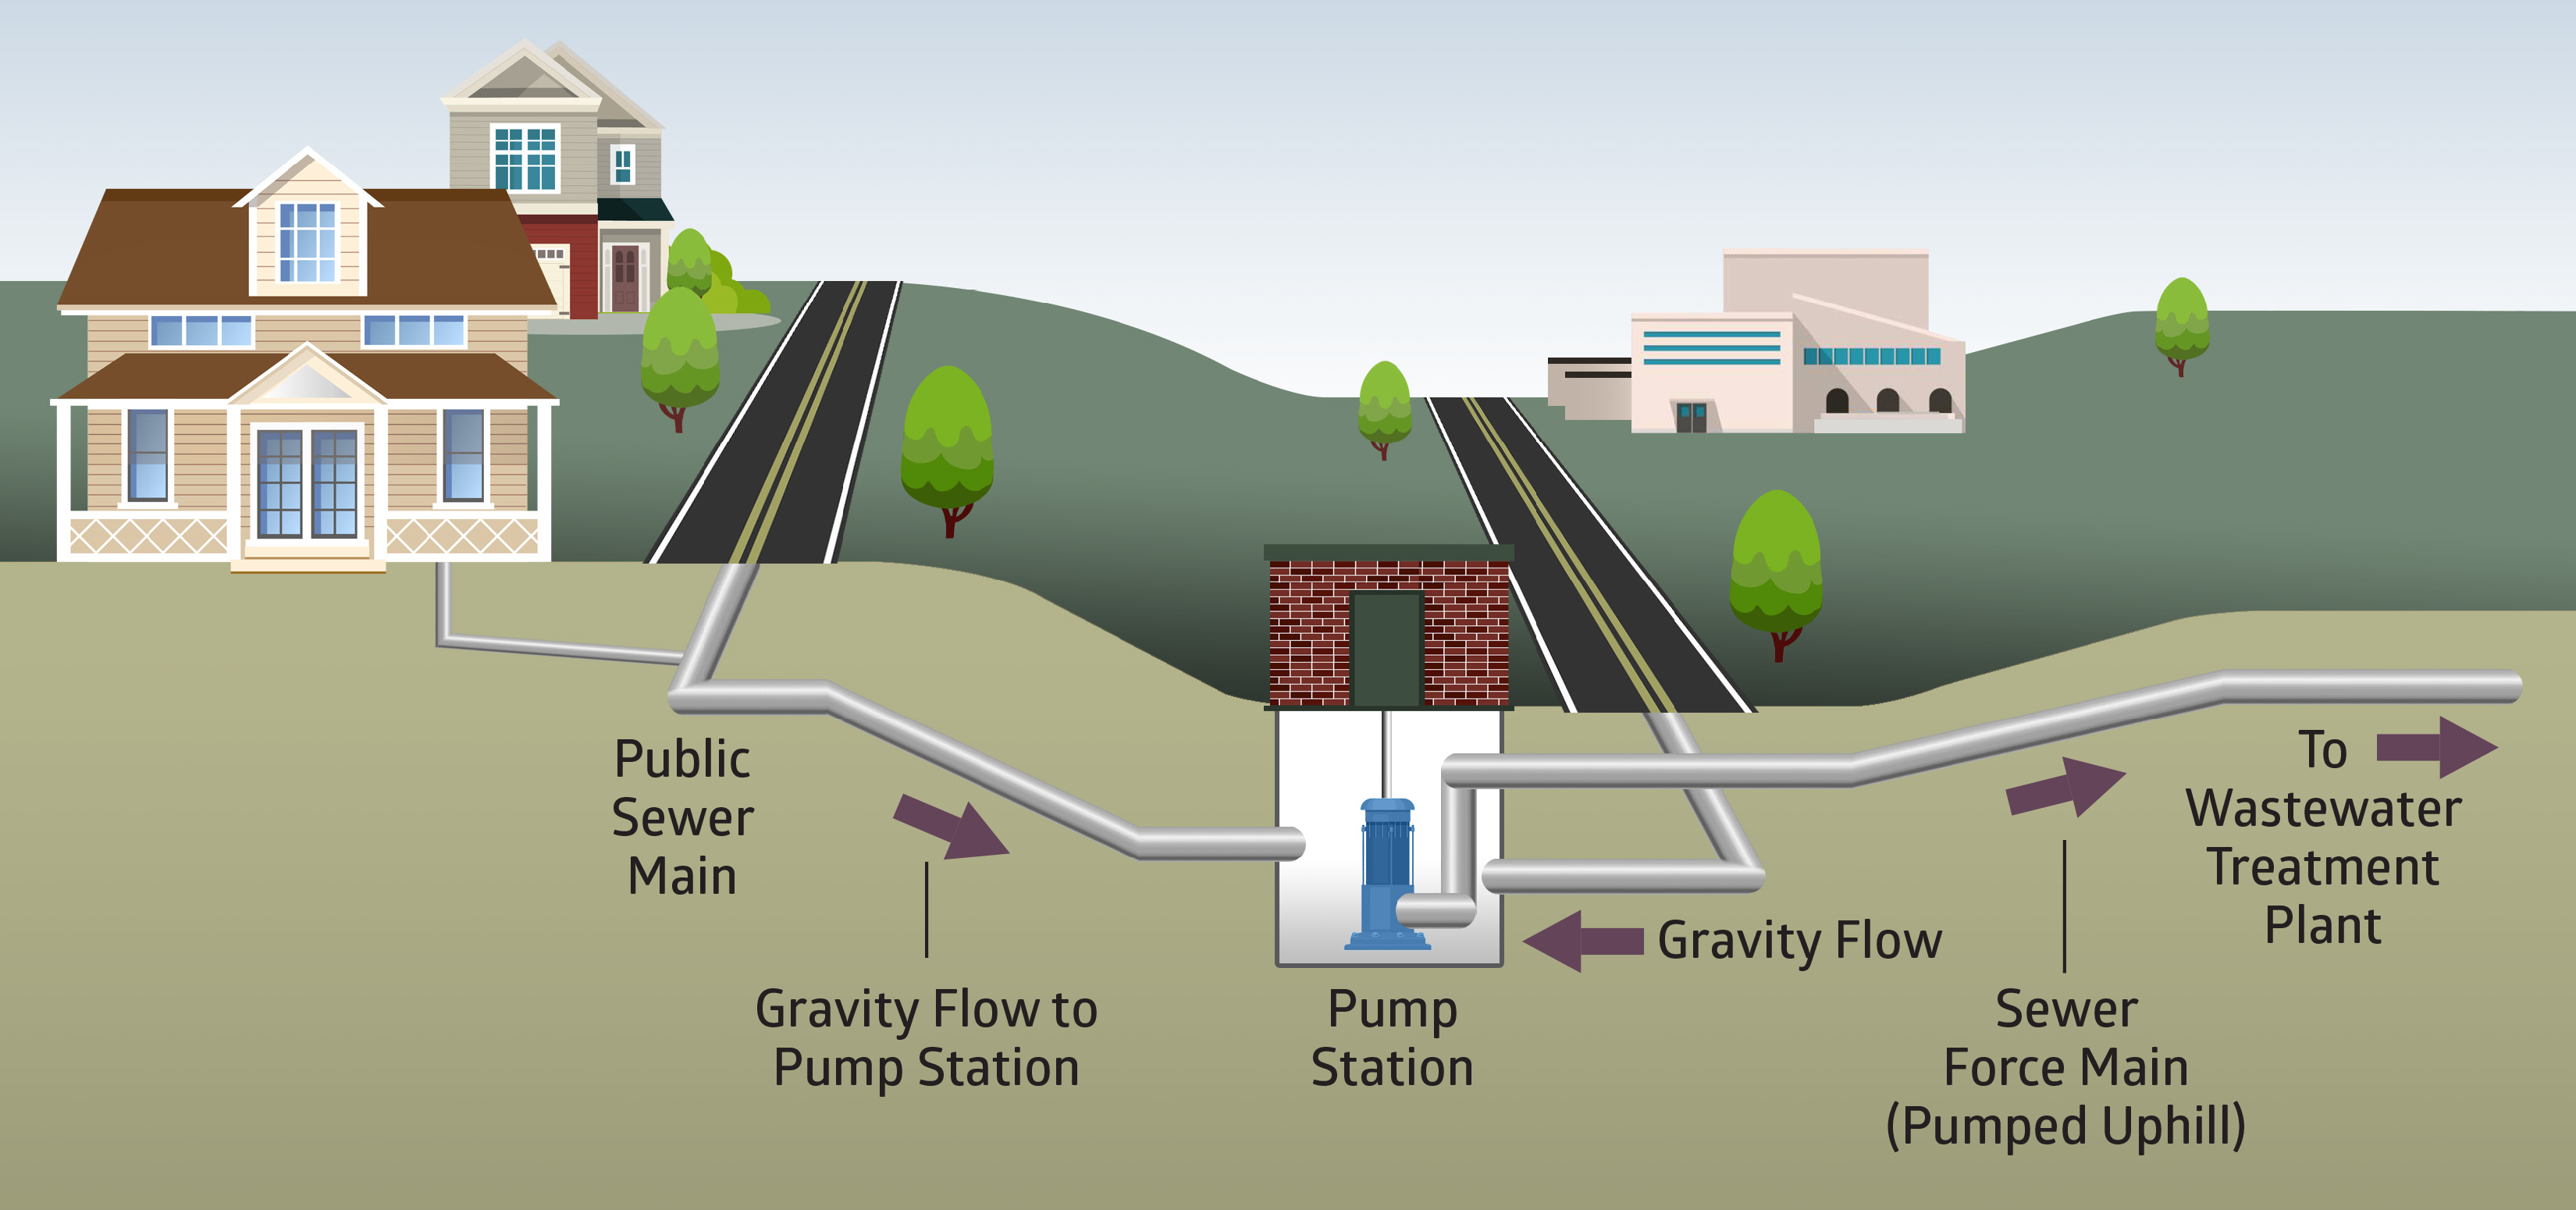 Gravity Sewer diagram: Public Sewer Main → Gravity Flow to Pump Station → Pump Station → Sewer Force Main (Pumped Uphill) → To Wastewater Treatment Plant